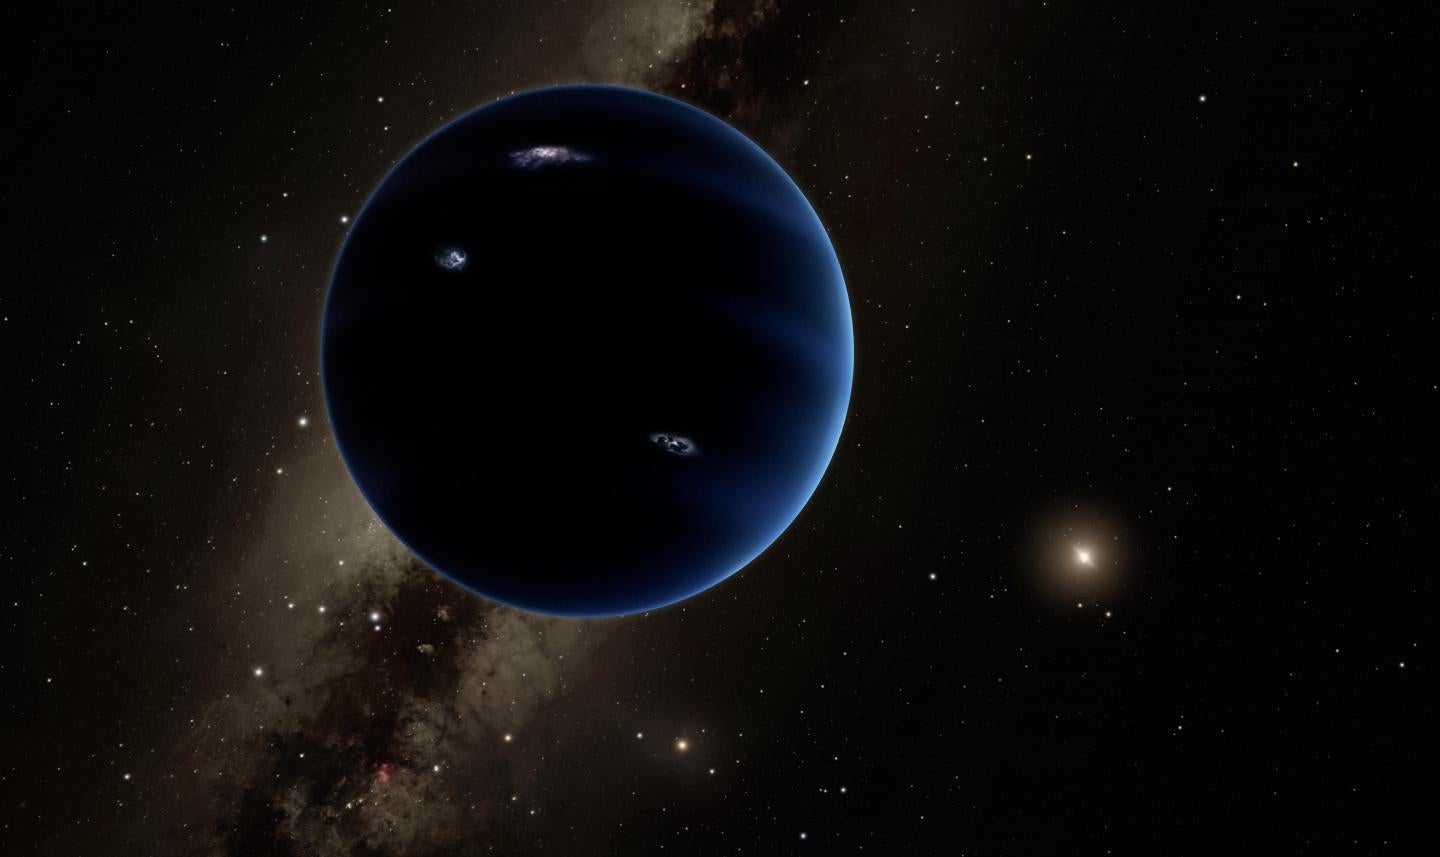 An artist’s impression of how Planet Nine – which is likely to be 10 times the mass of Earth, and at least 400 times further from the Sun – might look